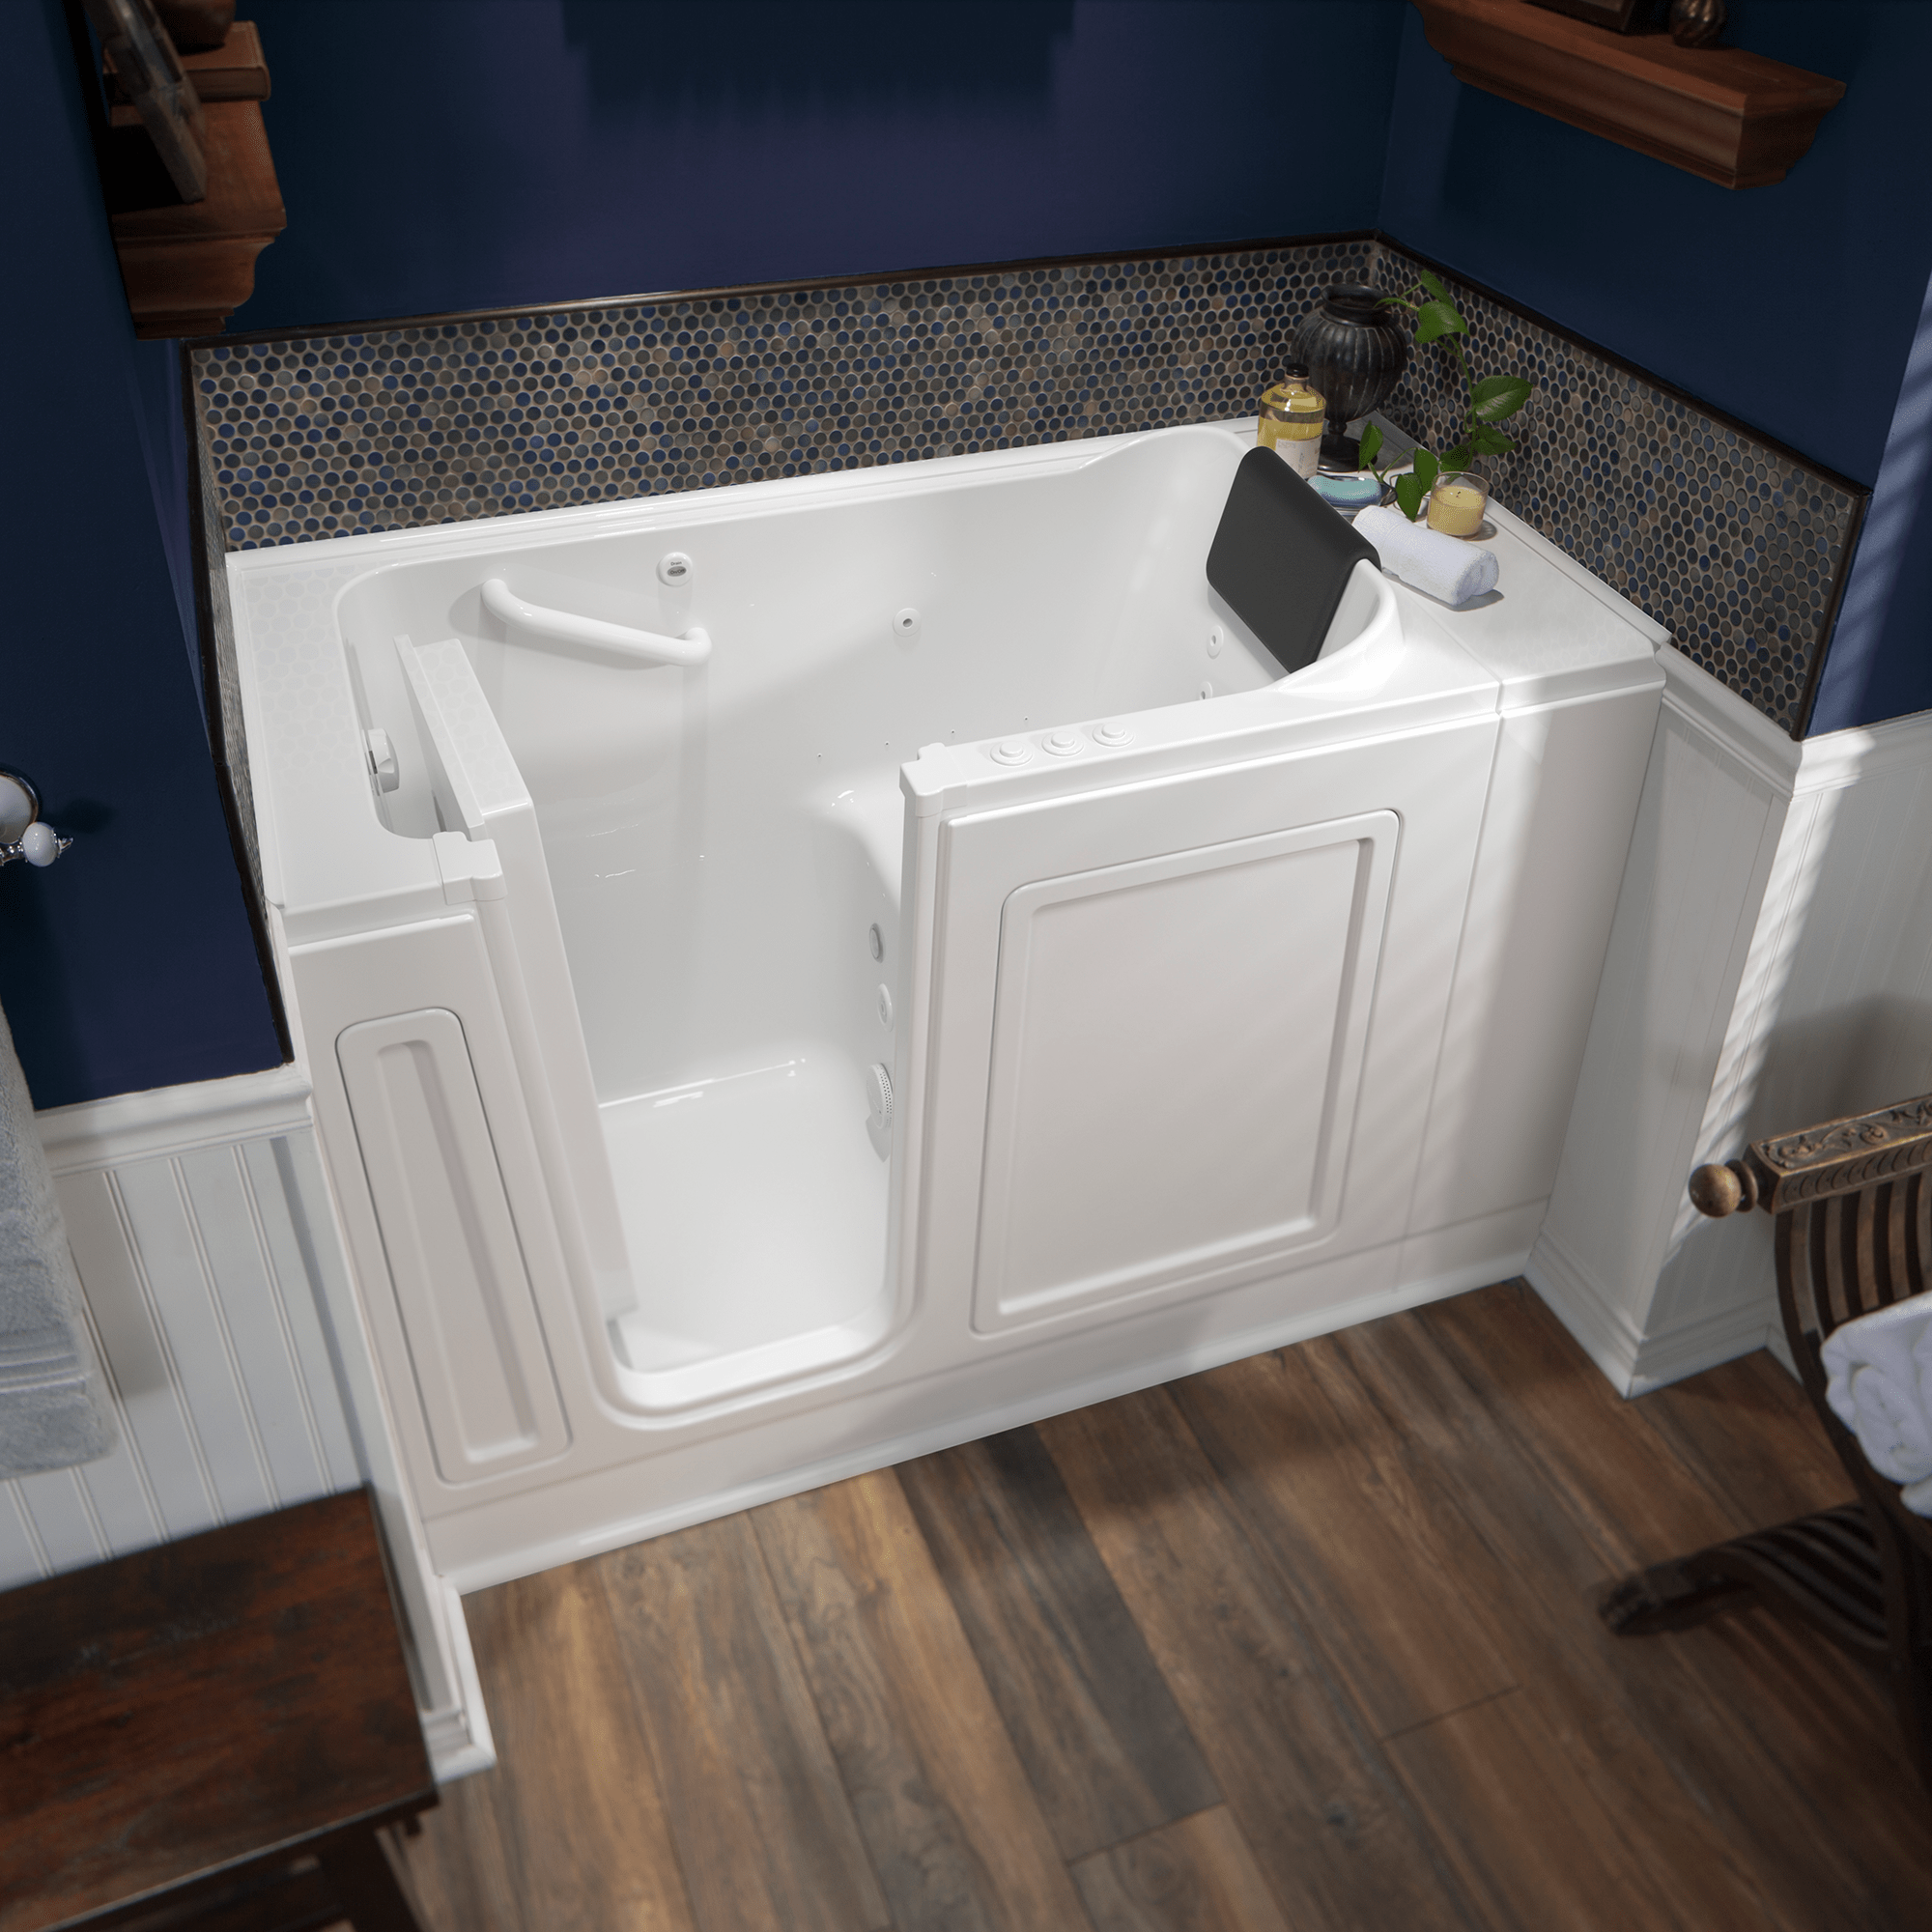 Acrylic Luxury Series 28 x 48 Inch Walk in Tub With Combination Air Spa and Whirlpool Systems   Left Hand Drain WIB WHITE